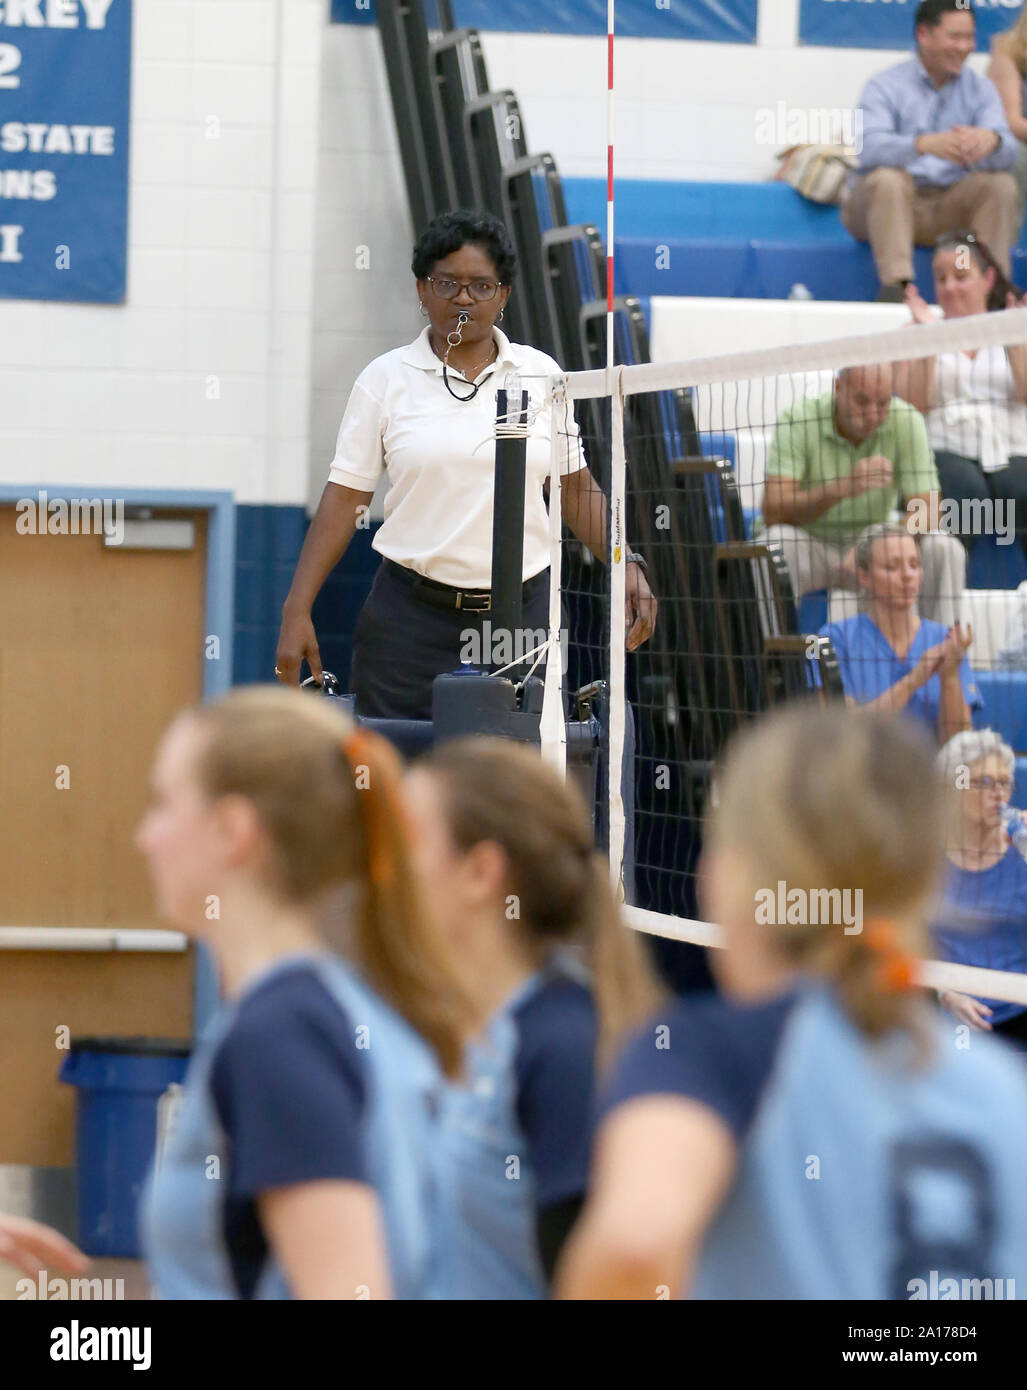 Volleyball referee at a high school game Stock Photo